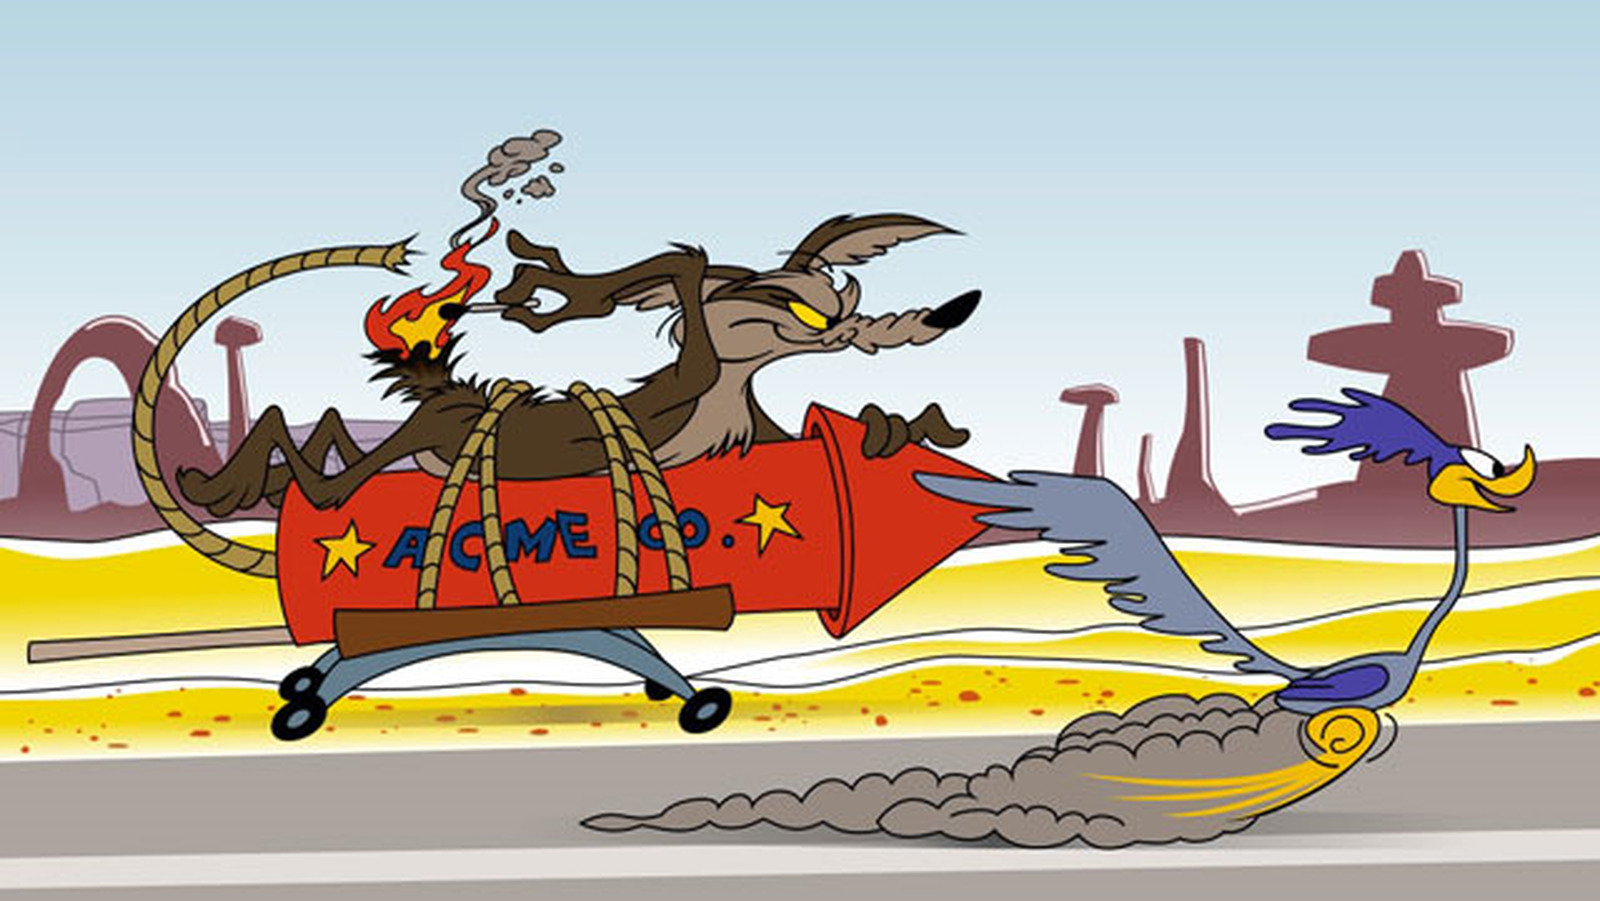 Read The Article That Inspired Coyote Vs. Acme